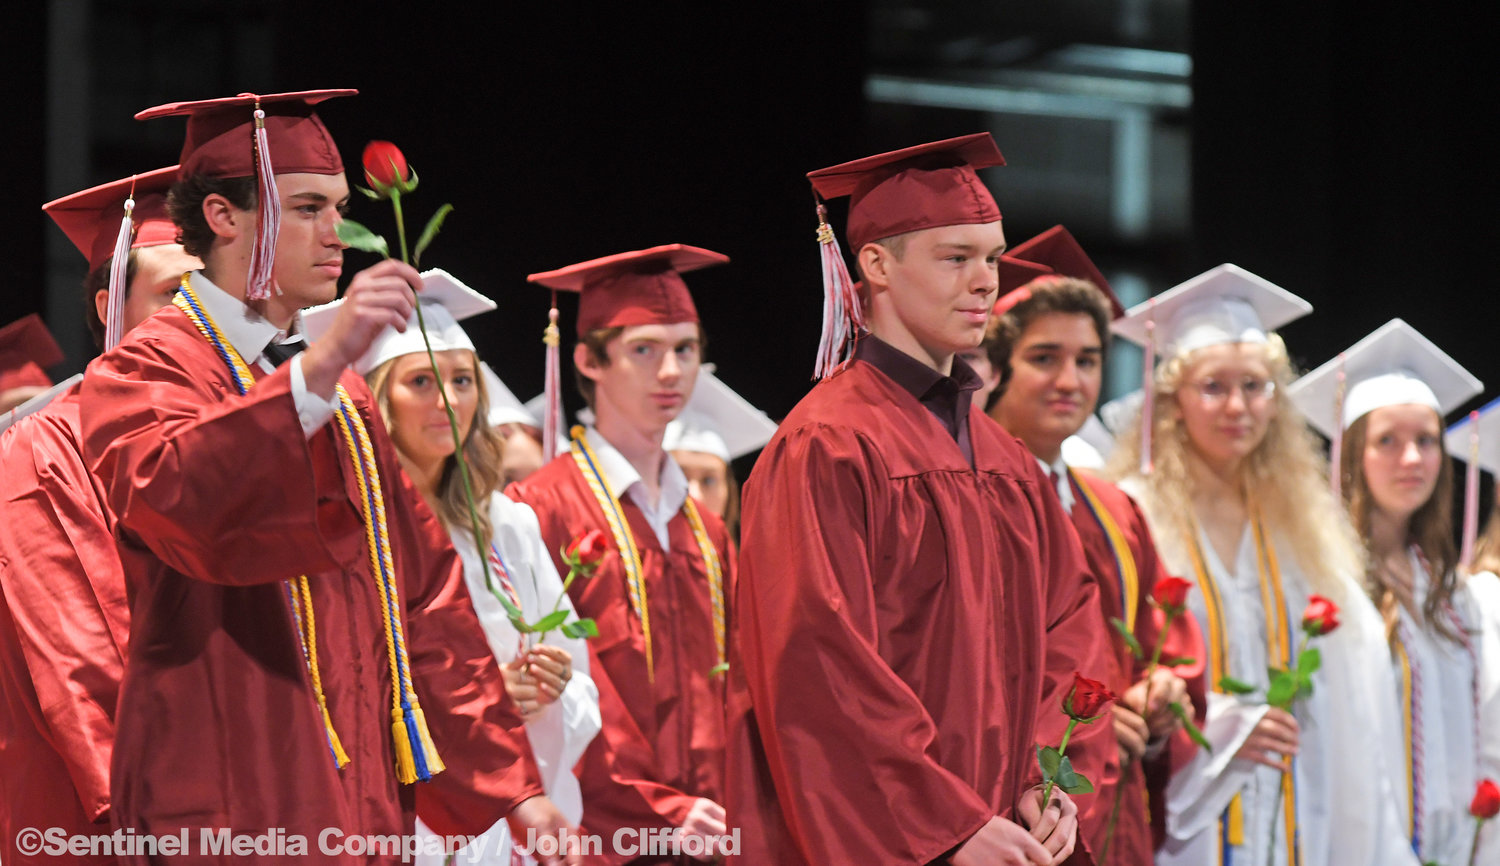 On Saturday, June 18, Clinton Central School held its 91st commencement in the district performing arts center.